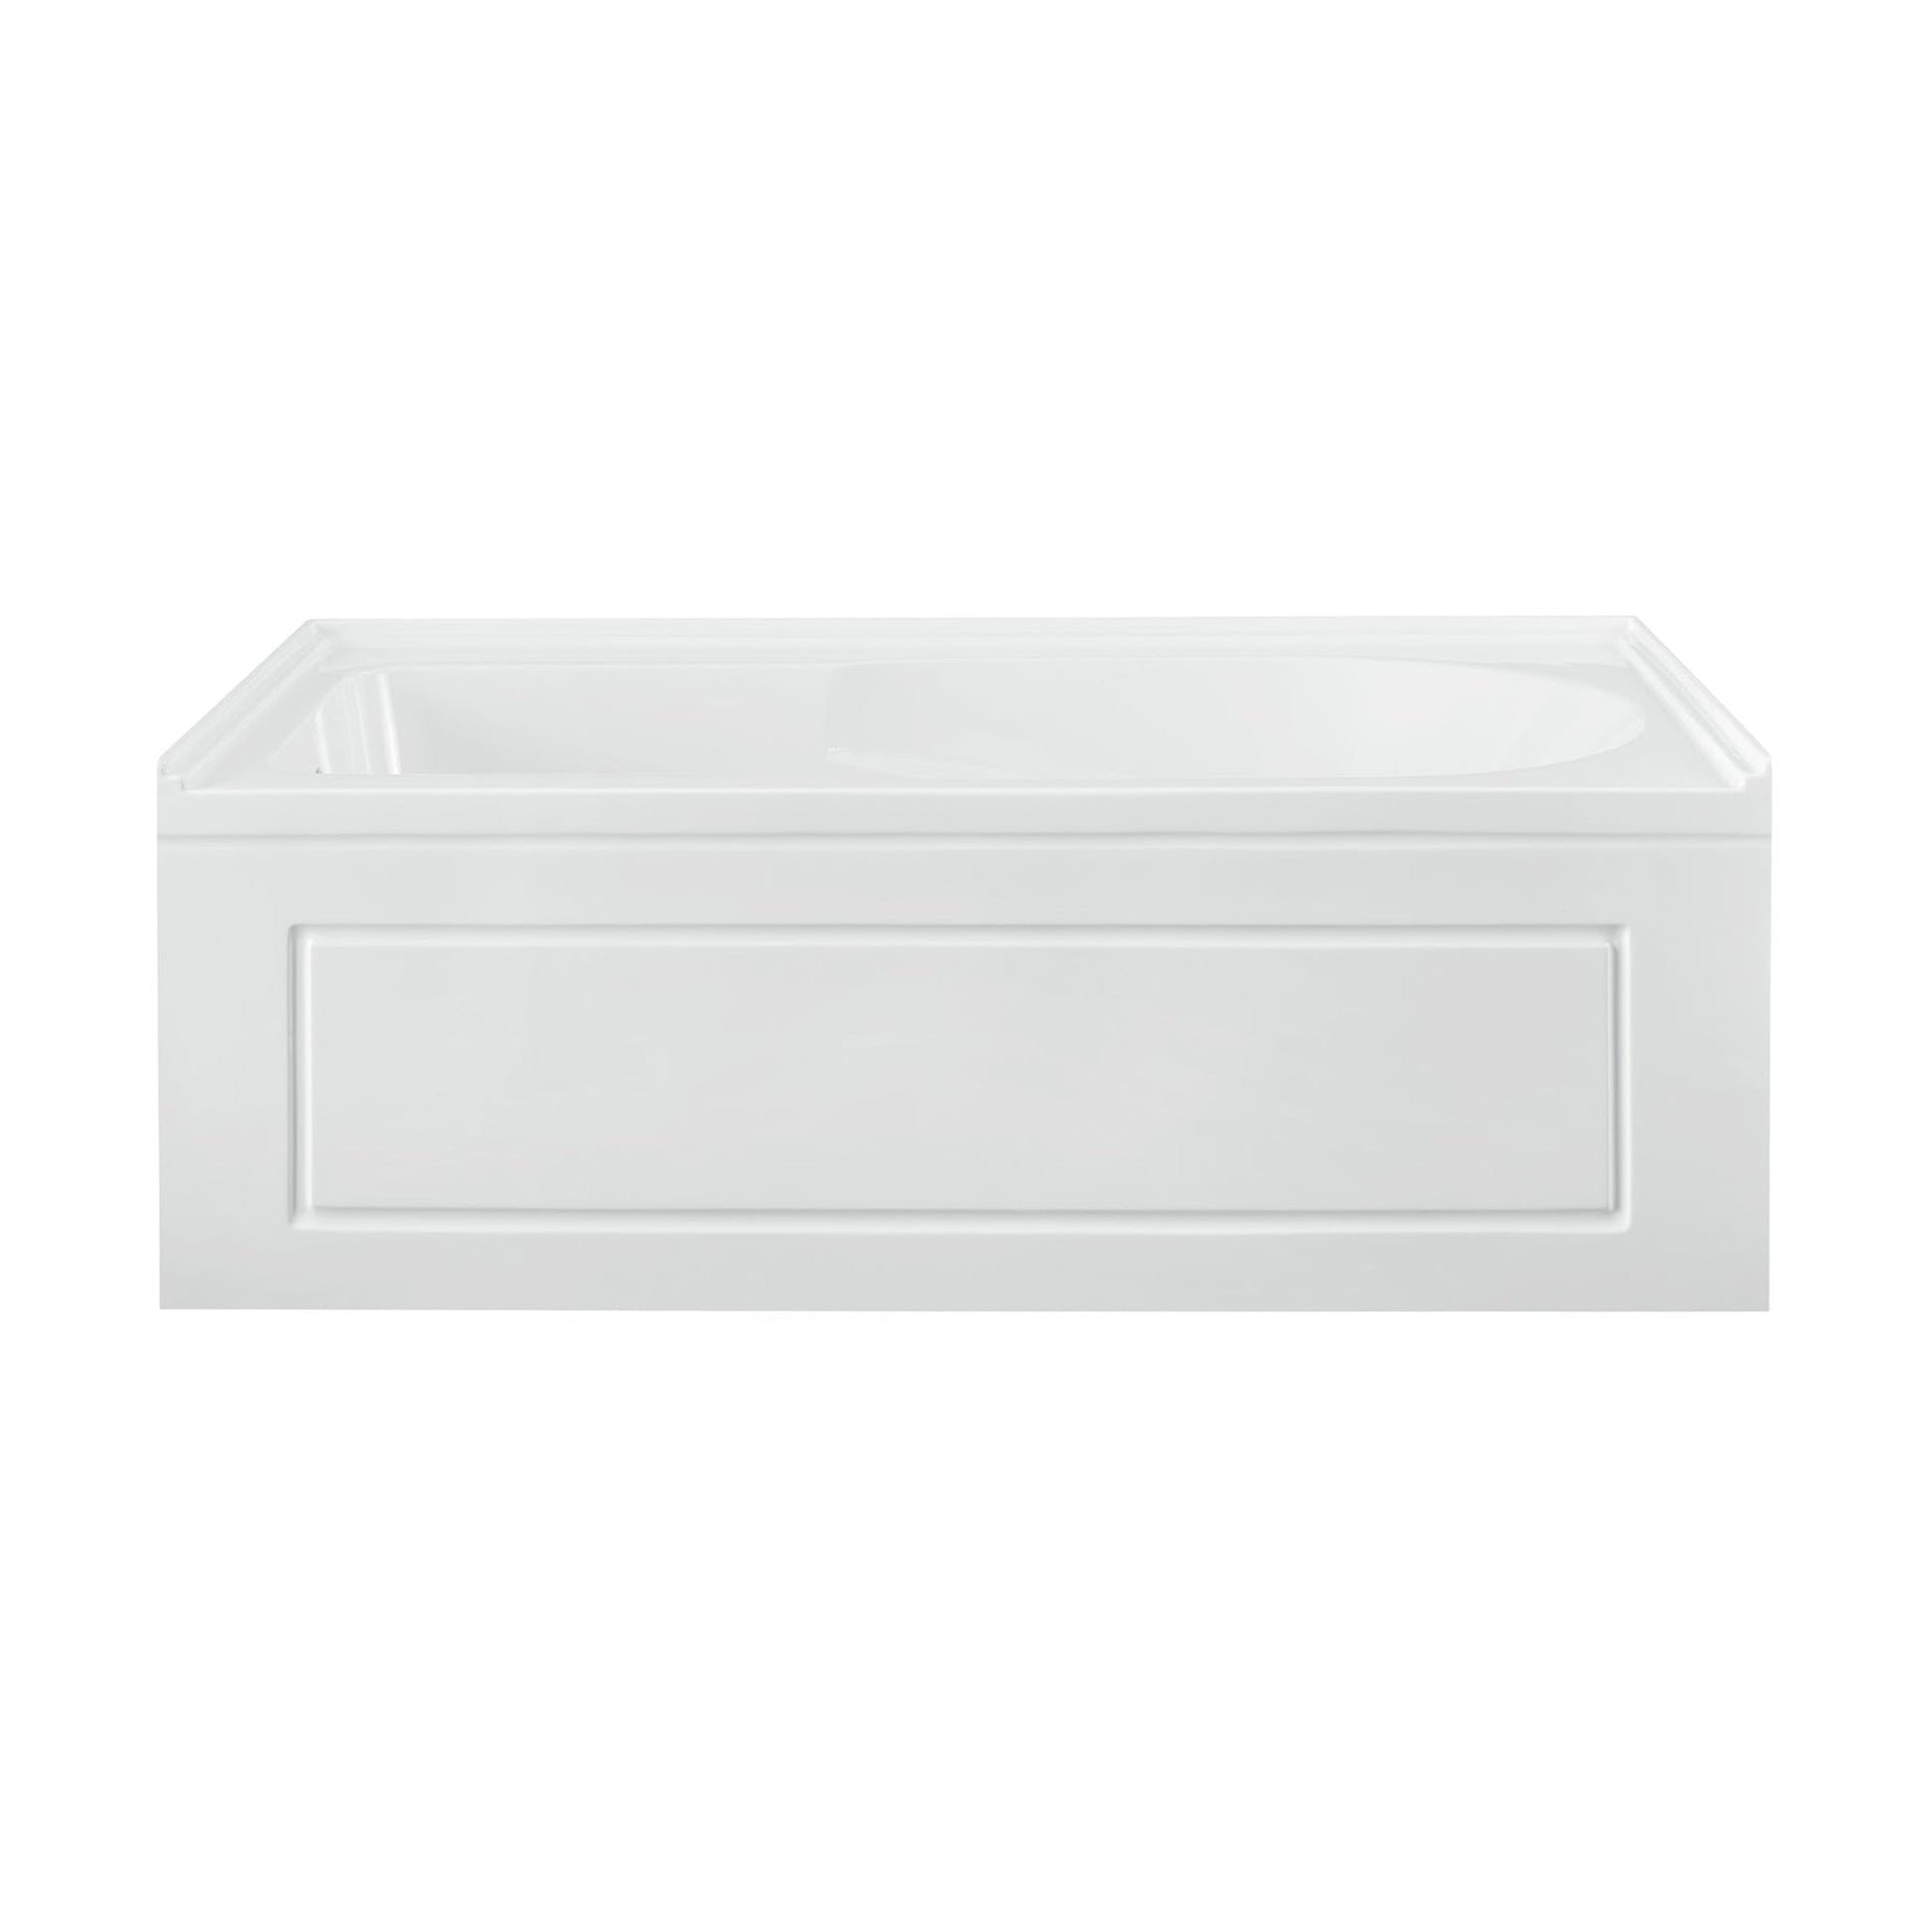 Swiss Madison Concorde 60" x 32" Glossy White Left-Hand Drain Alcove Bathtub With Integrated Armrest and Built-In Flange & Apron Front